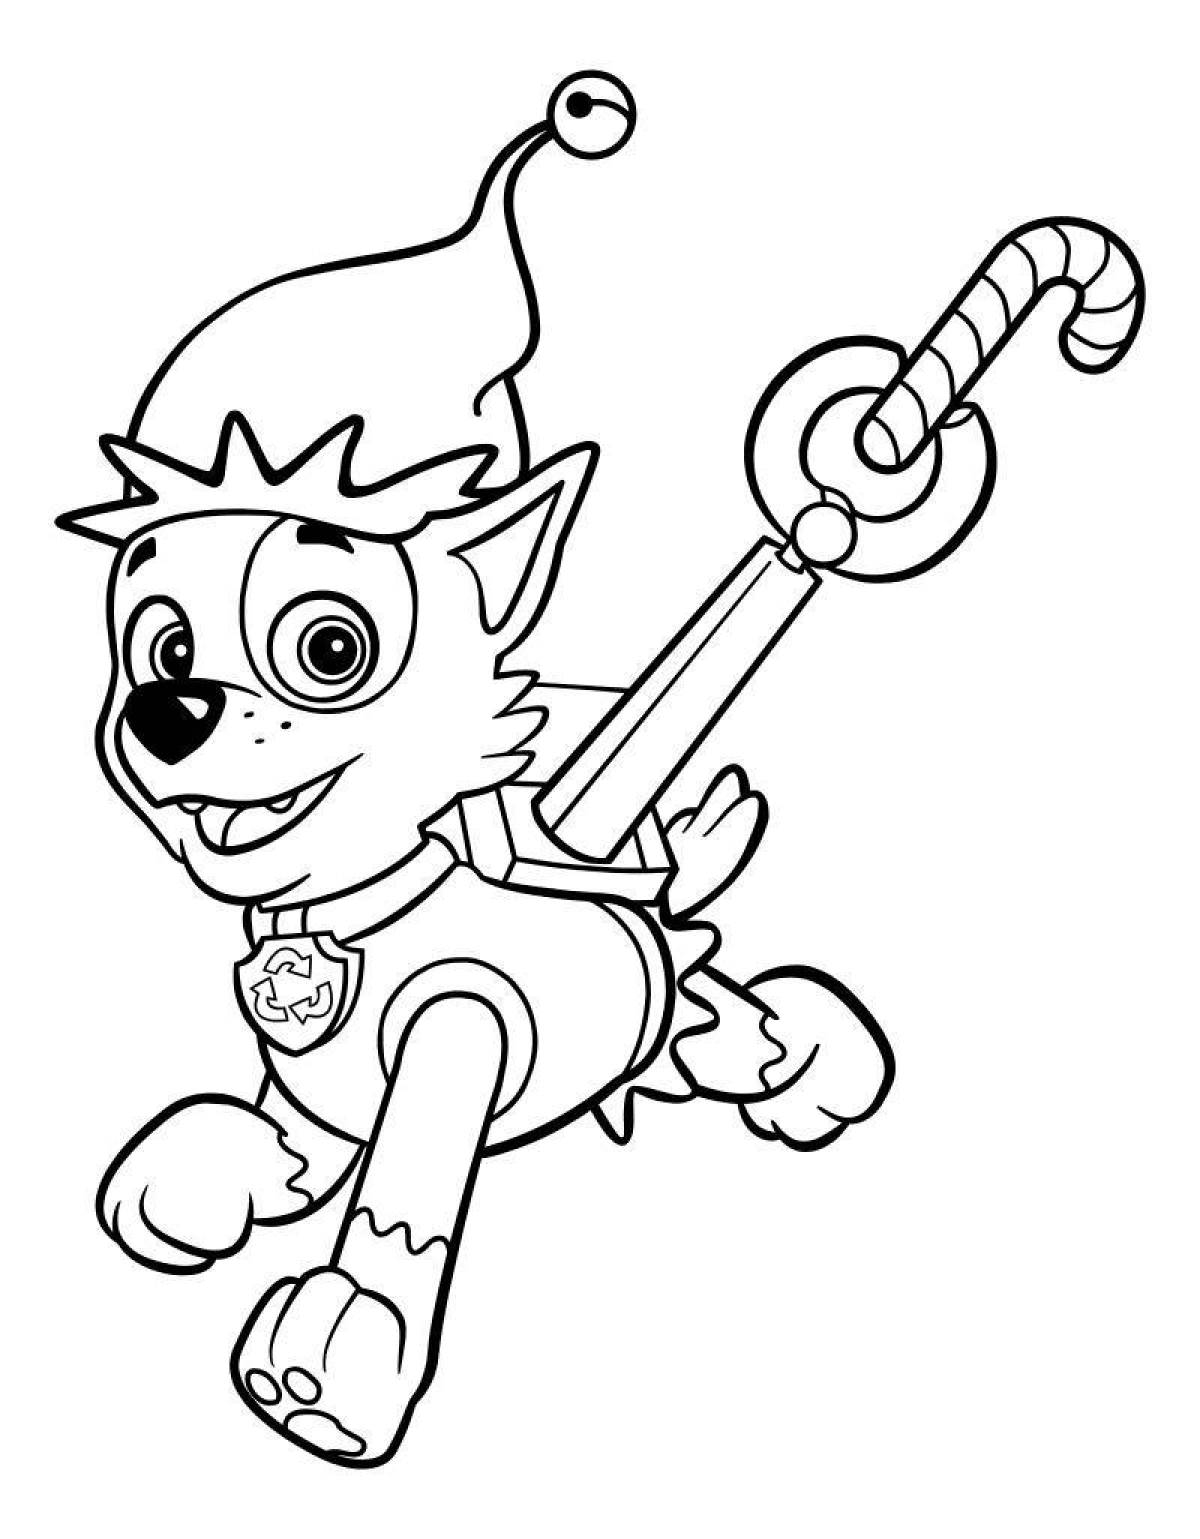 Colorful rocky coloring page